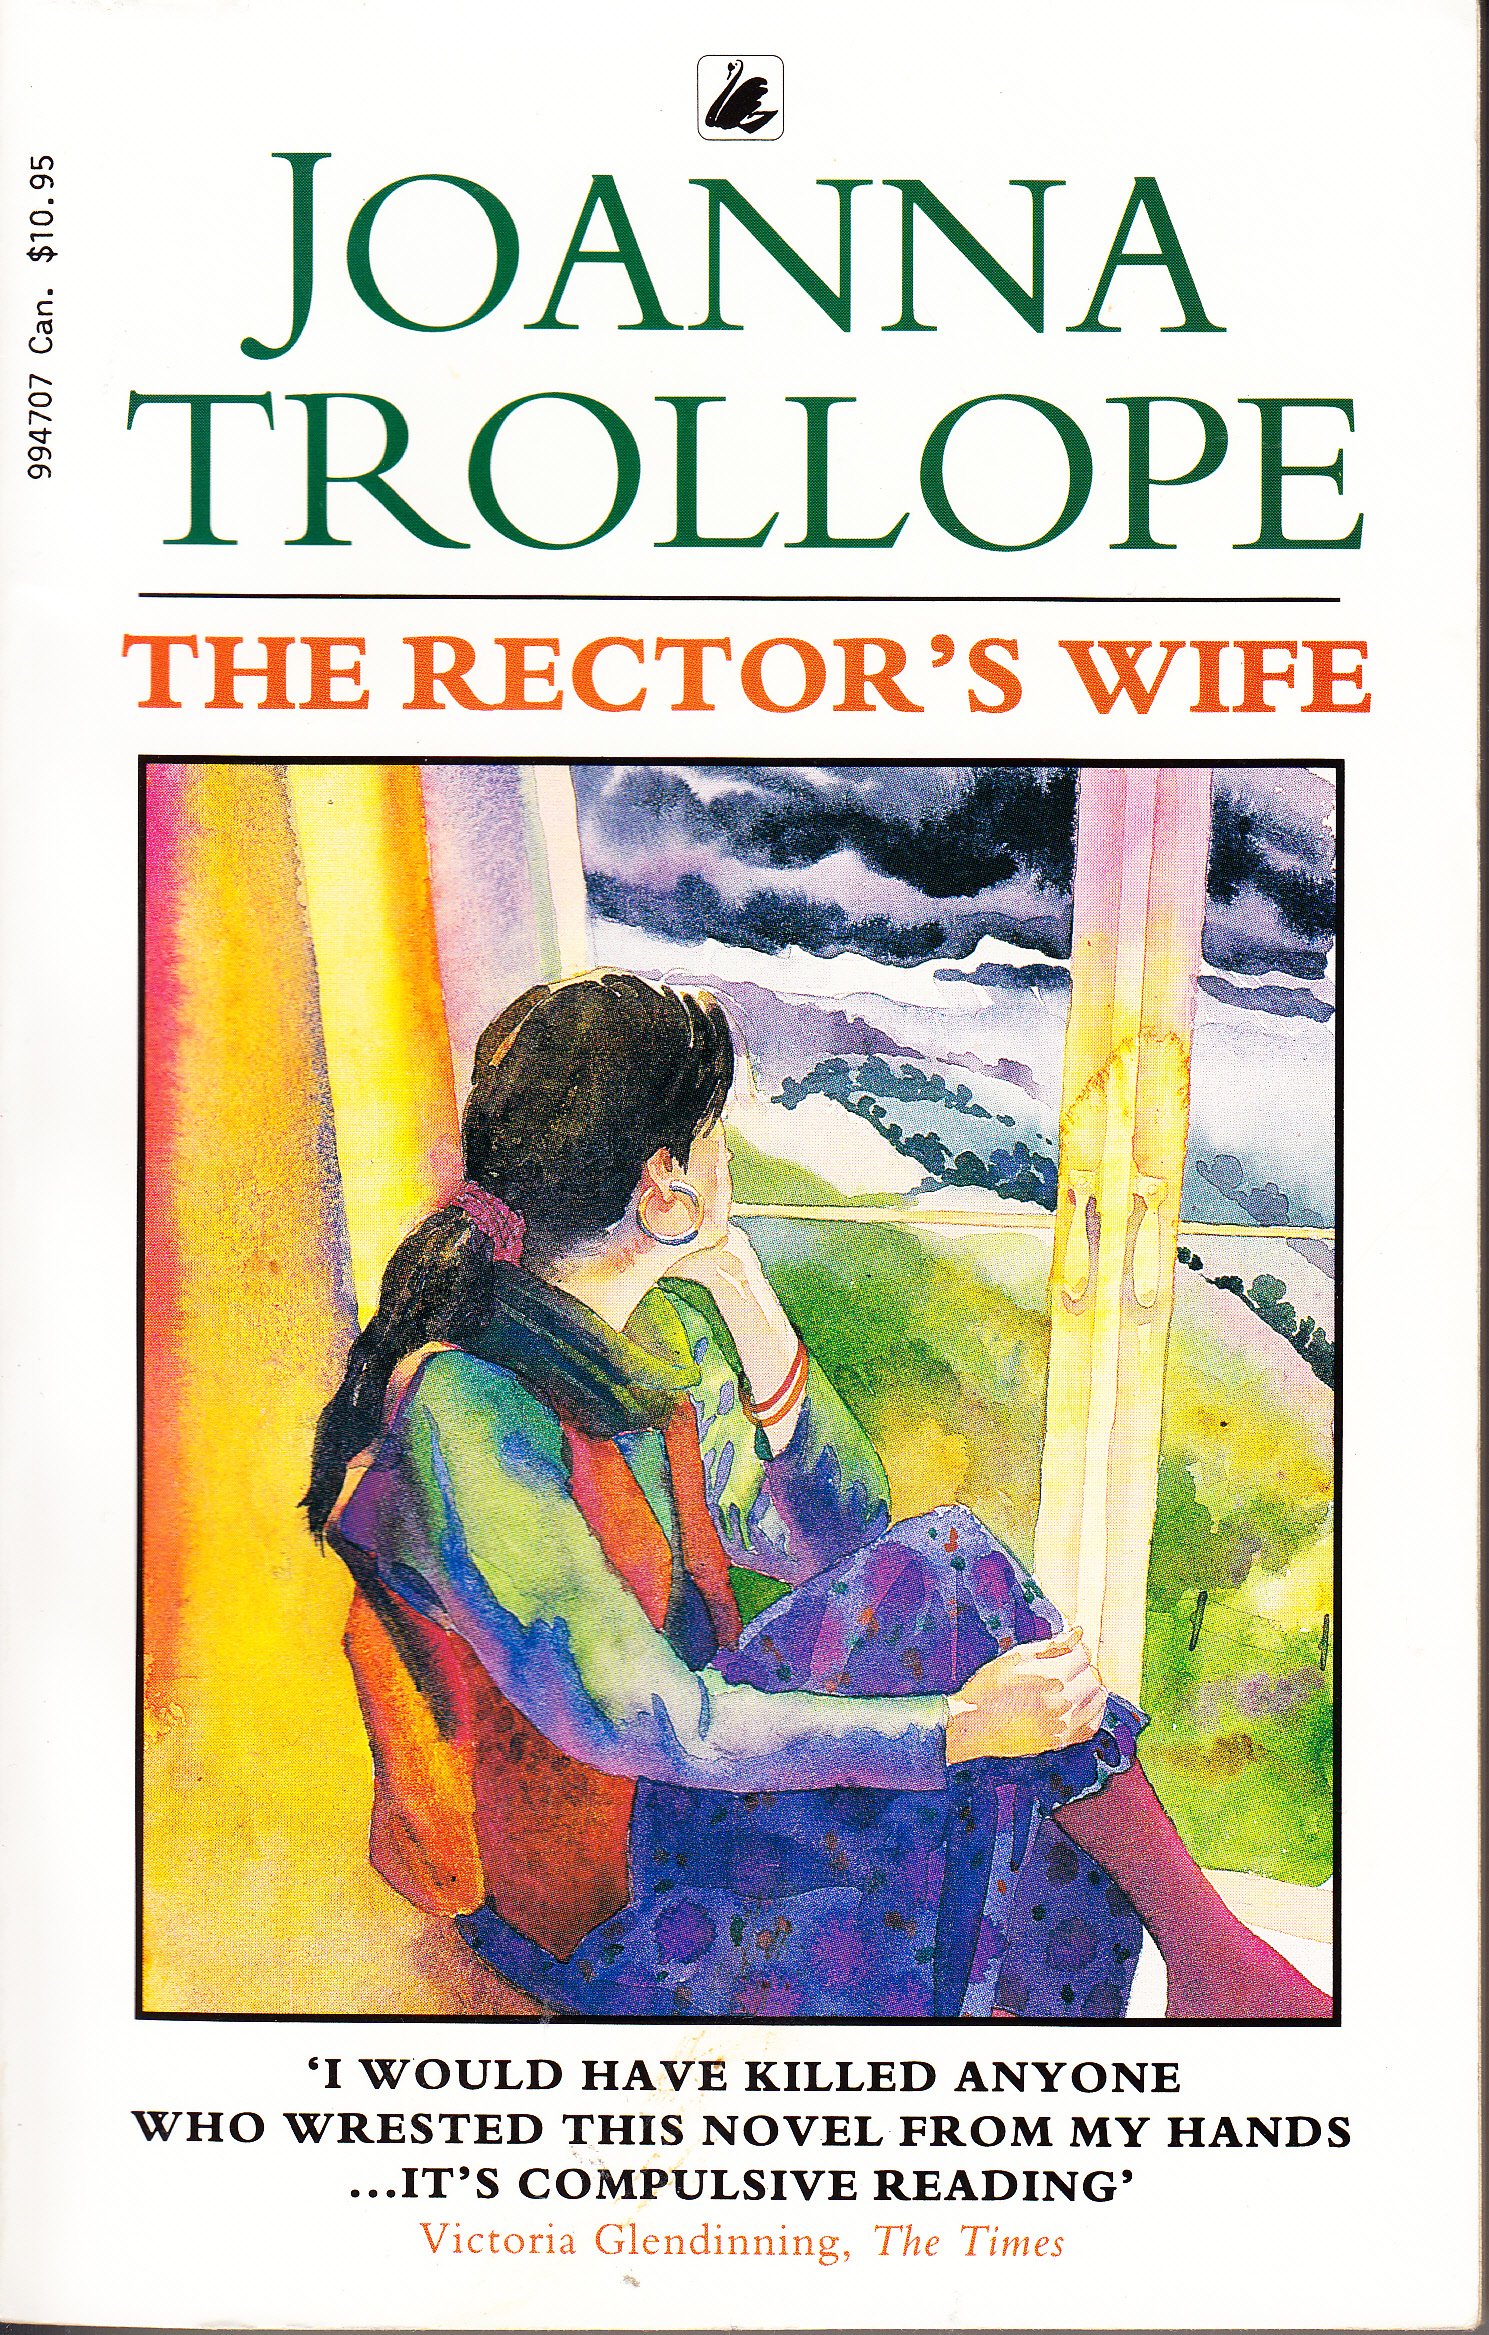 The Rector's Wife by Joanna Trollope